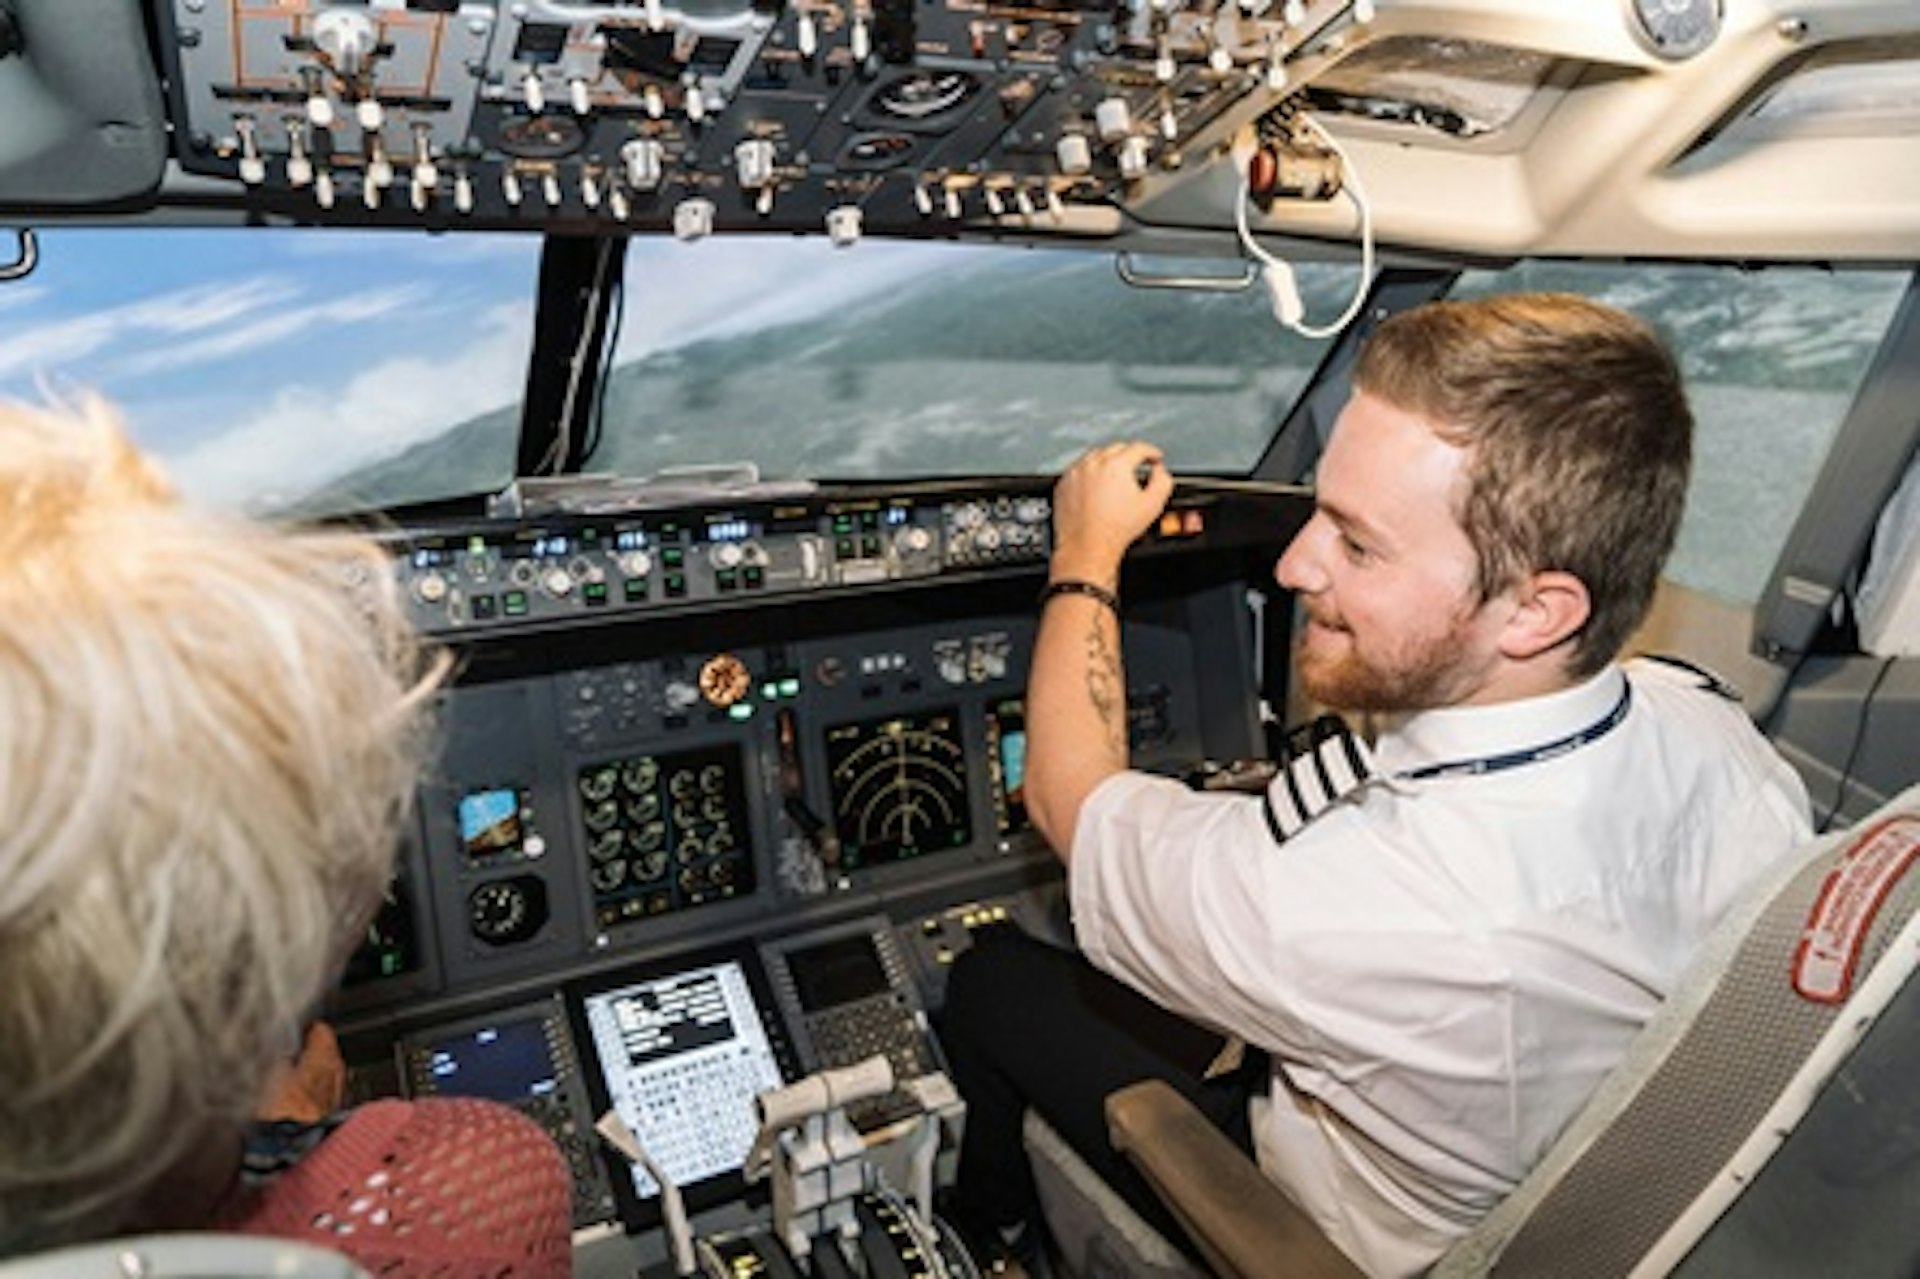 Flight Simulator Experience Aboard a Boeing 737 - 45 minutes 2